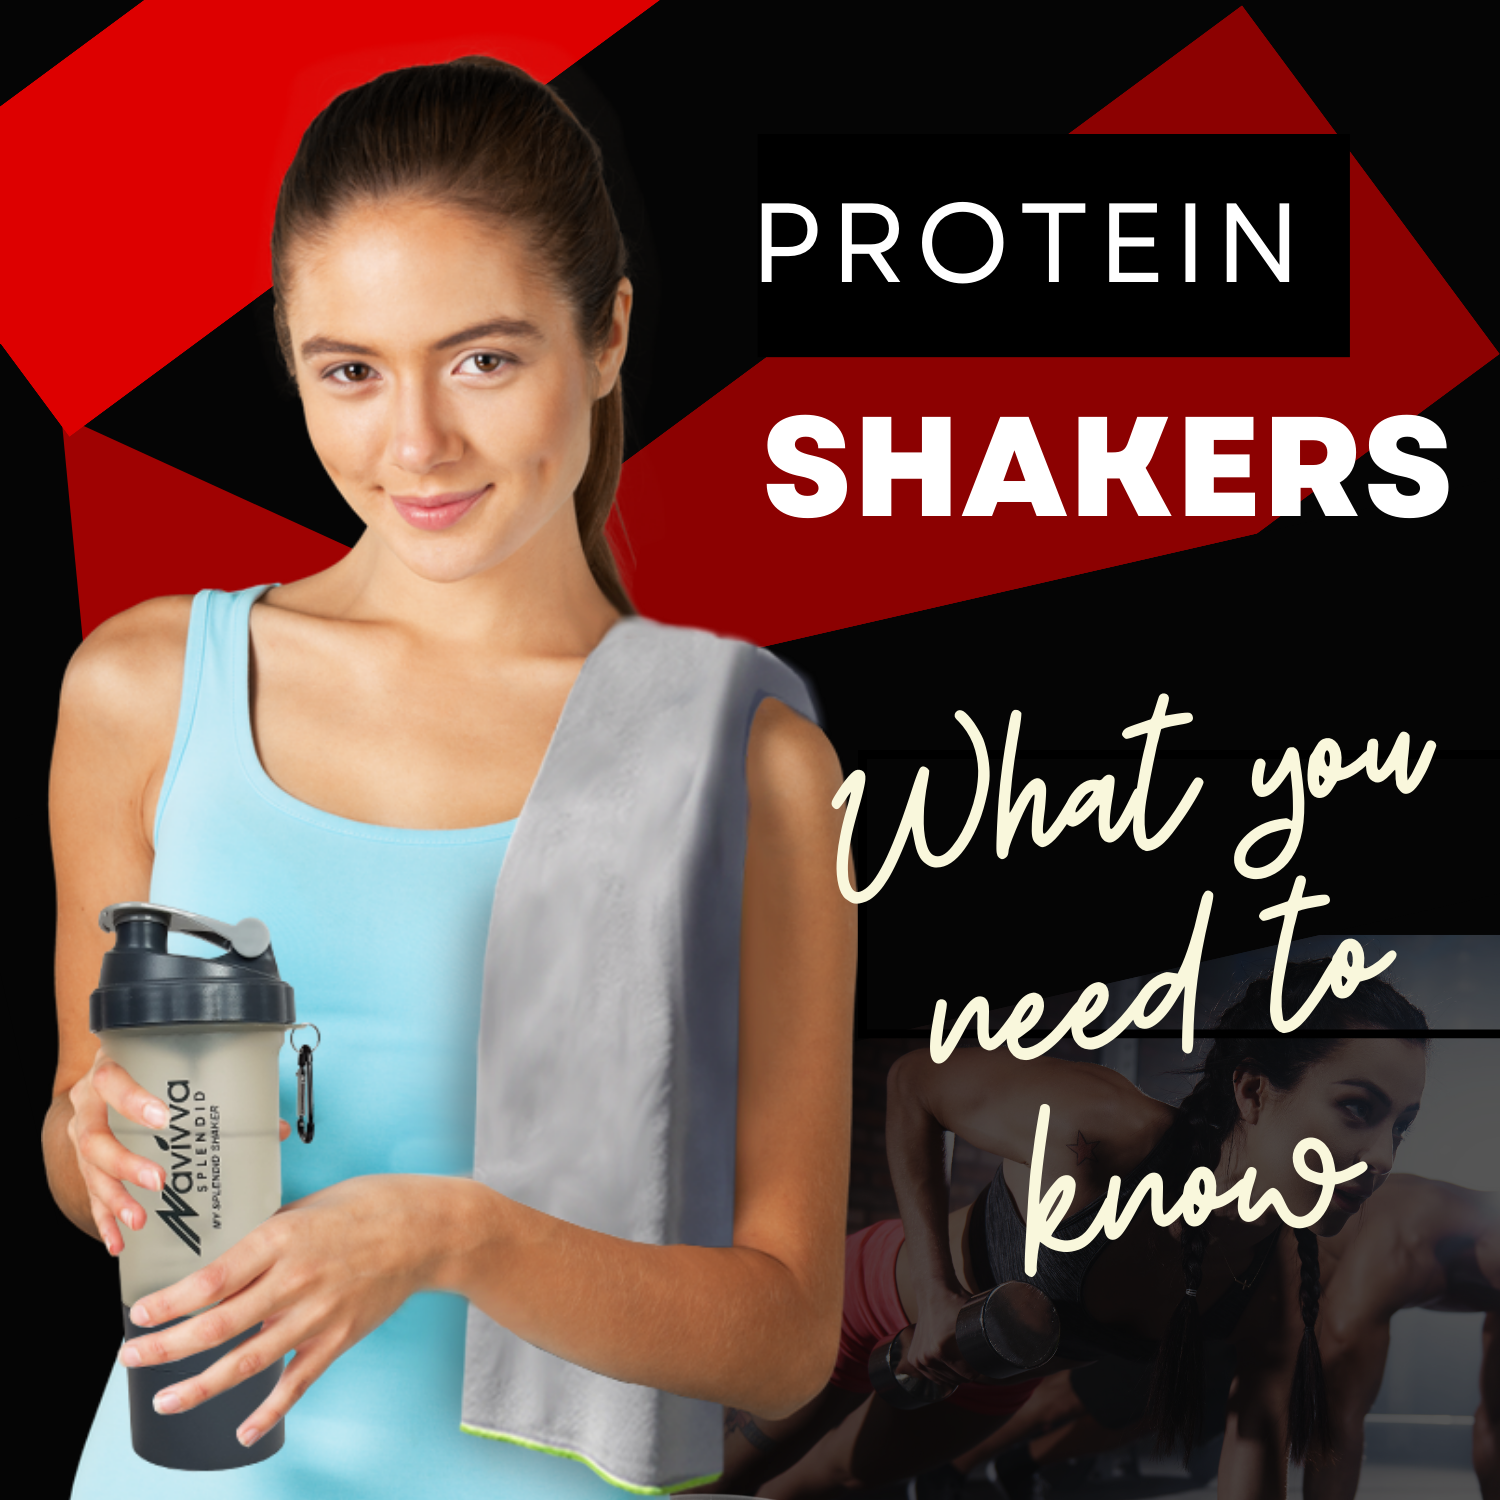 How Can Protein Shakers Boost Your Gym and Lifestyle?